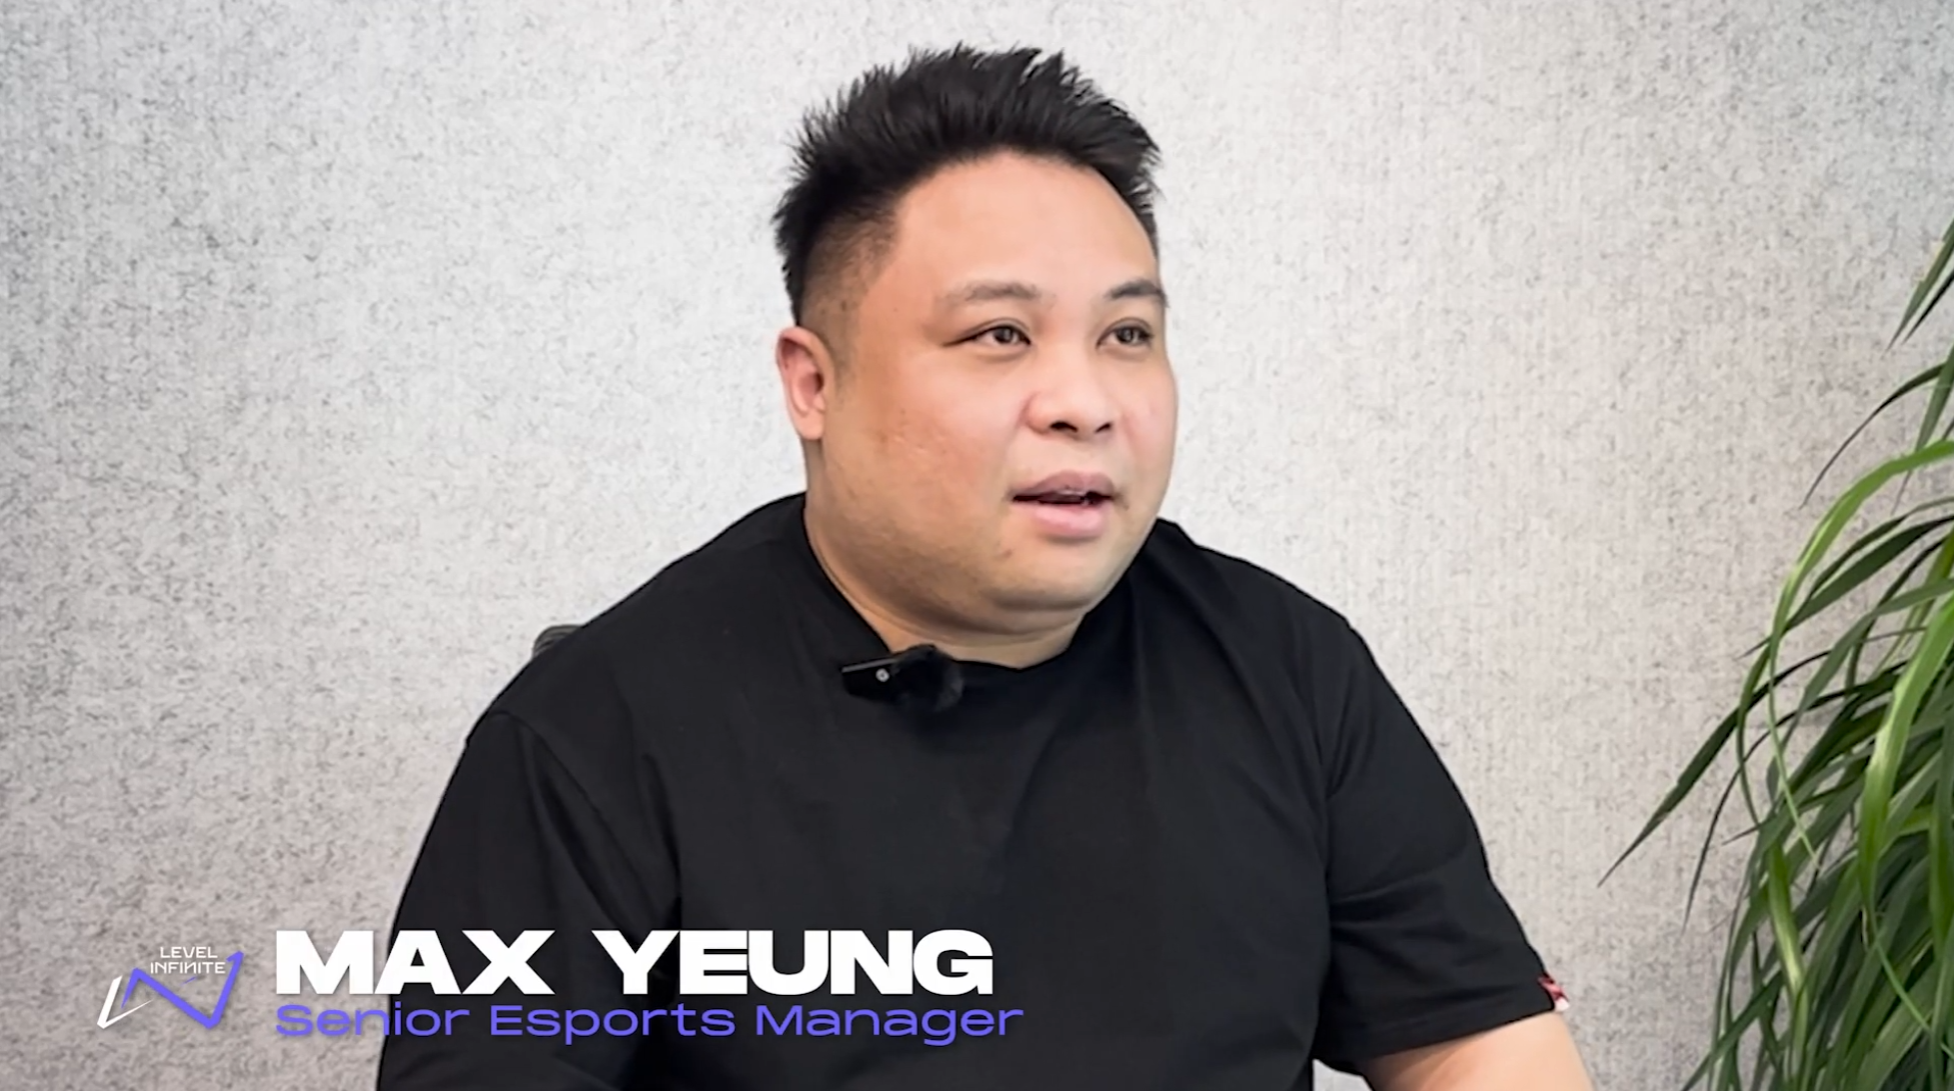 Max Yeung Tencent Video Screenshot Giving Advice on Esports Careers